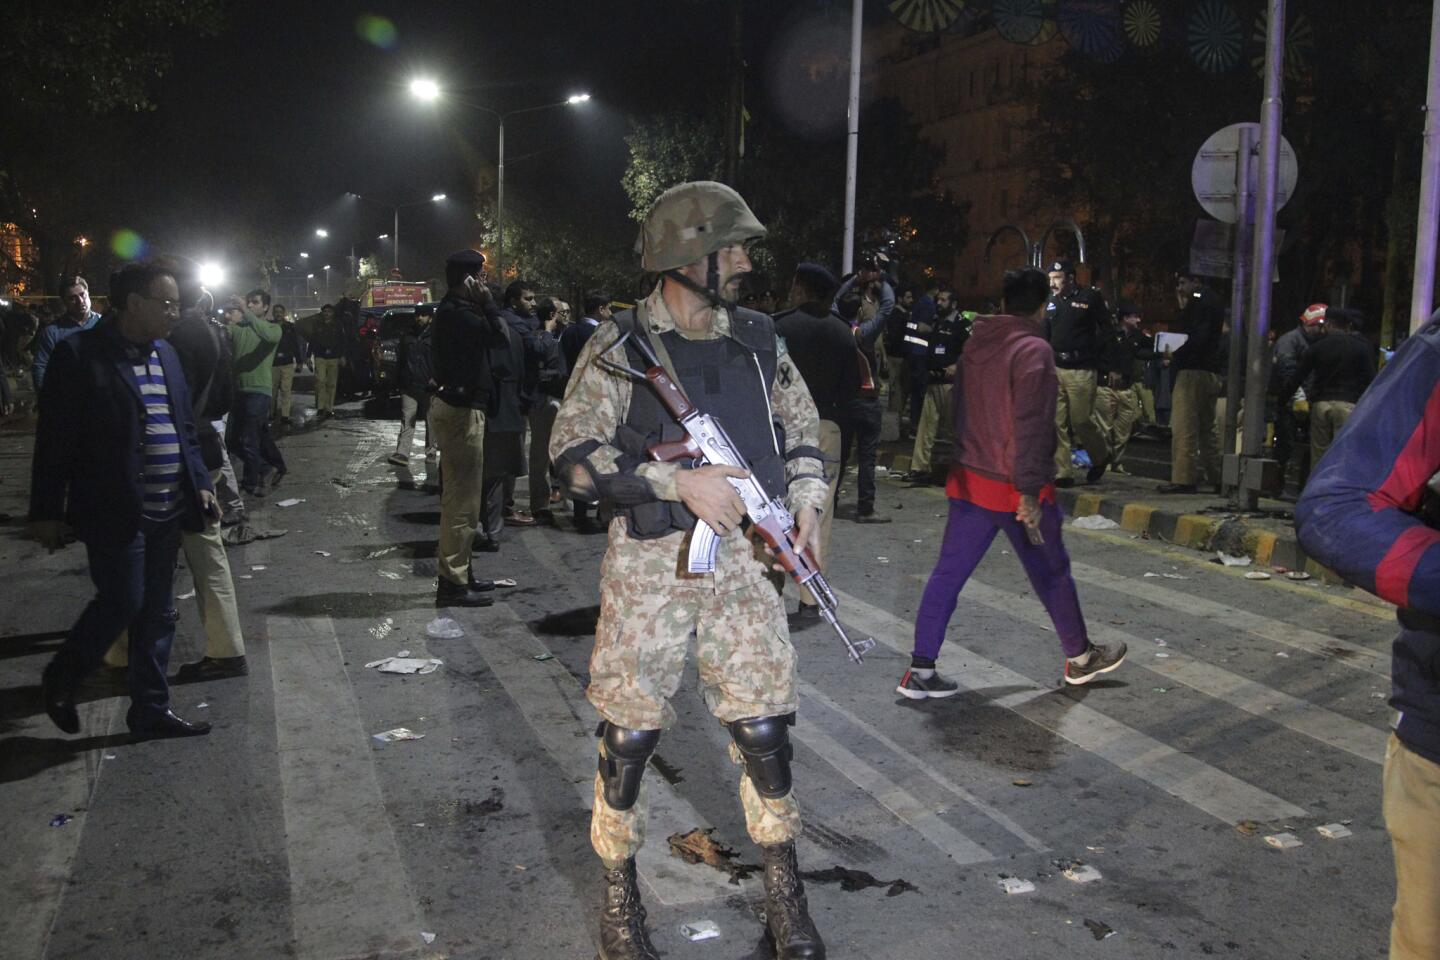 Police and security officers cordon off the area of a deadly bombing, in Lahore, Pakistan, on Feb. 13, 2017.